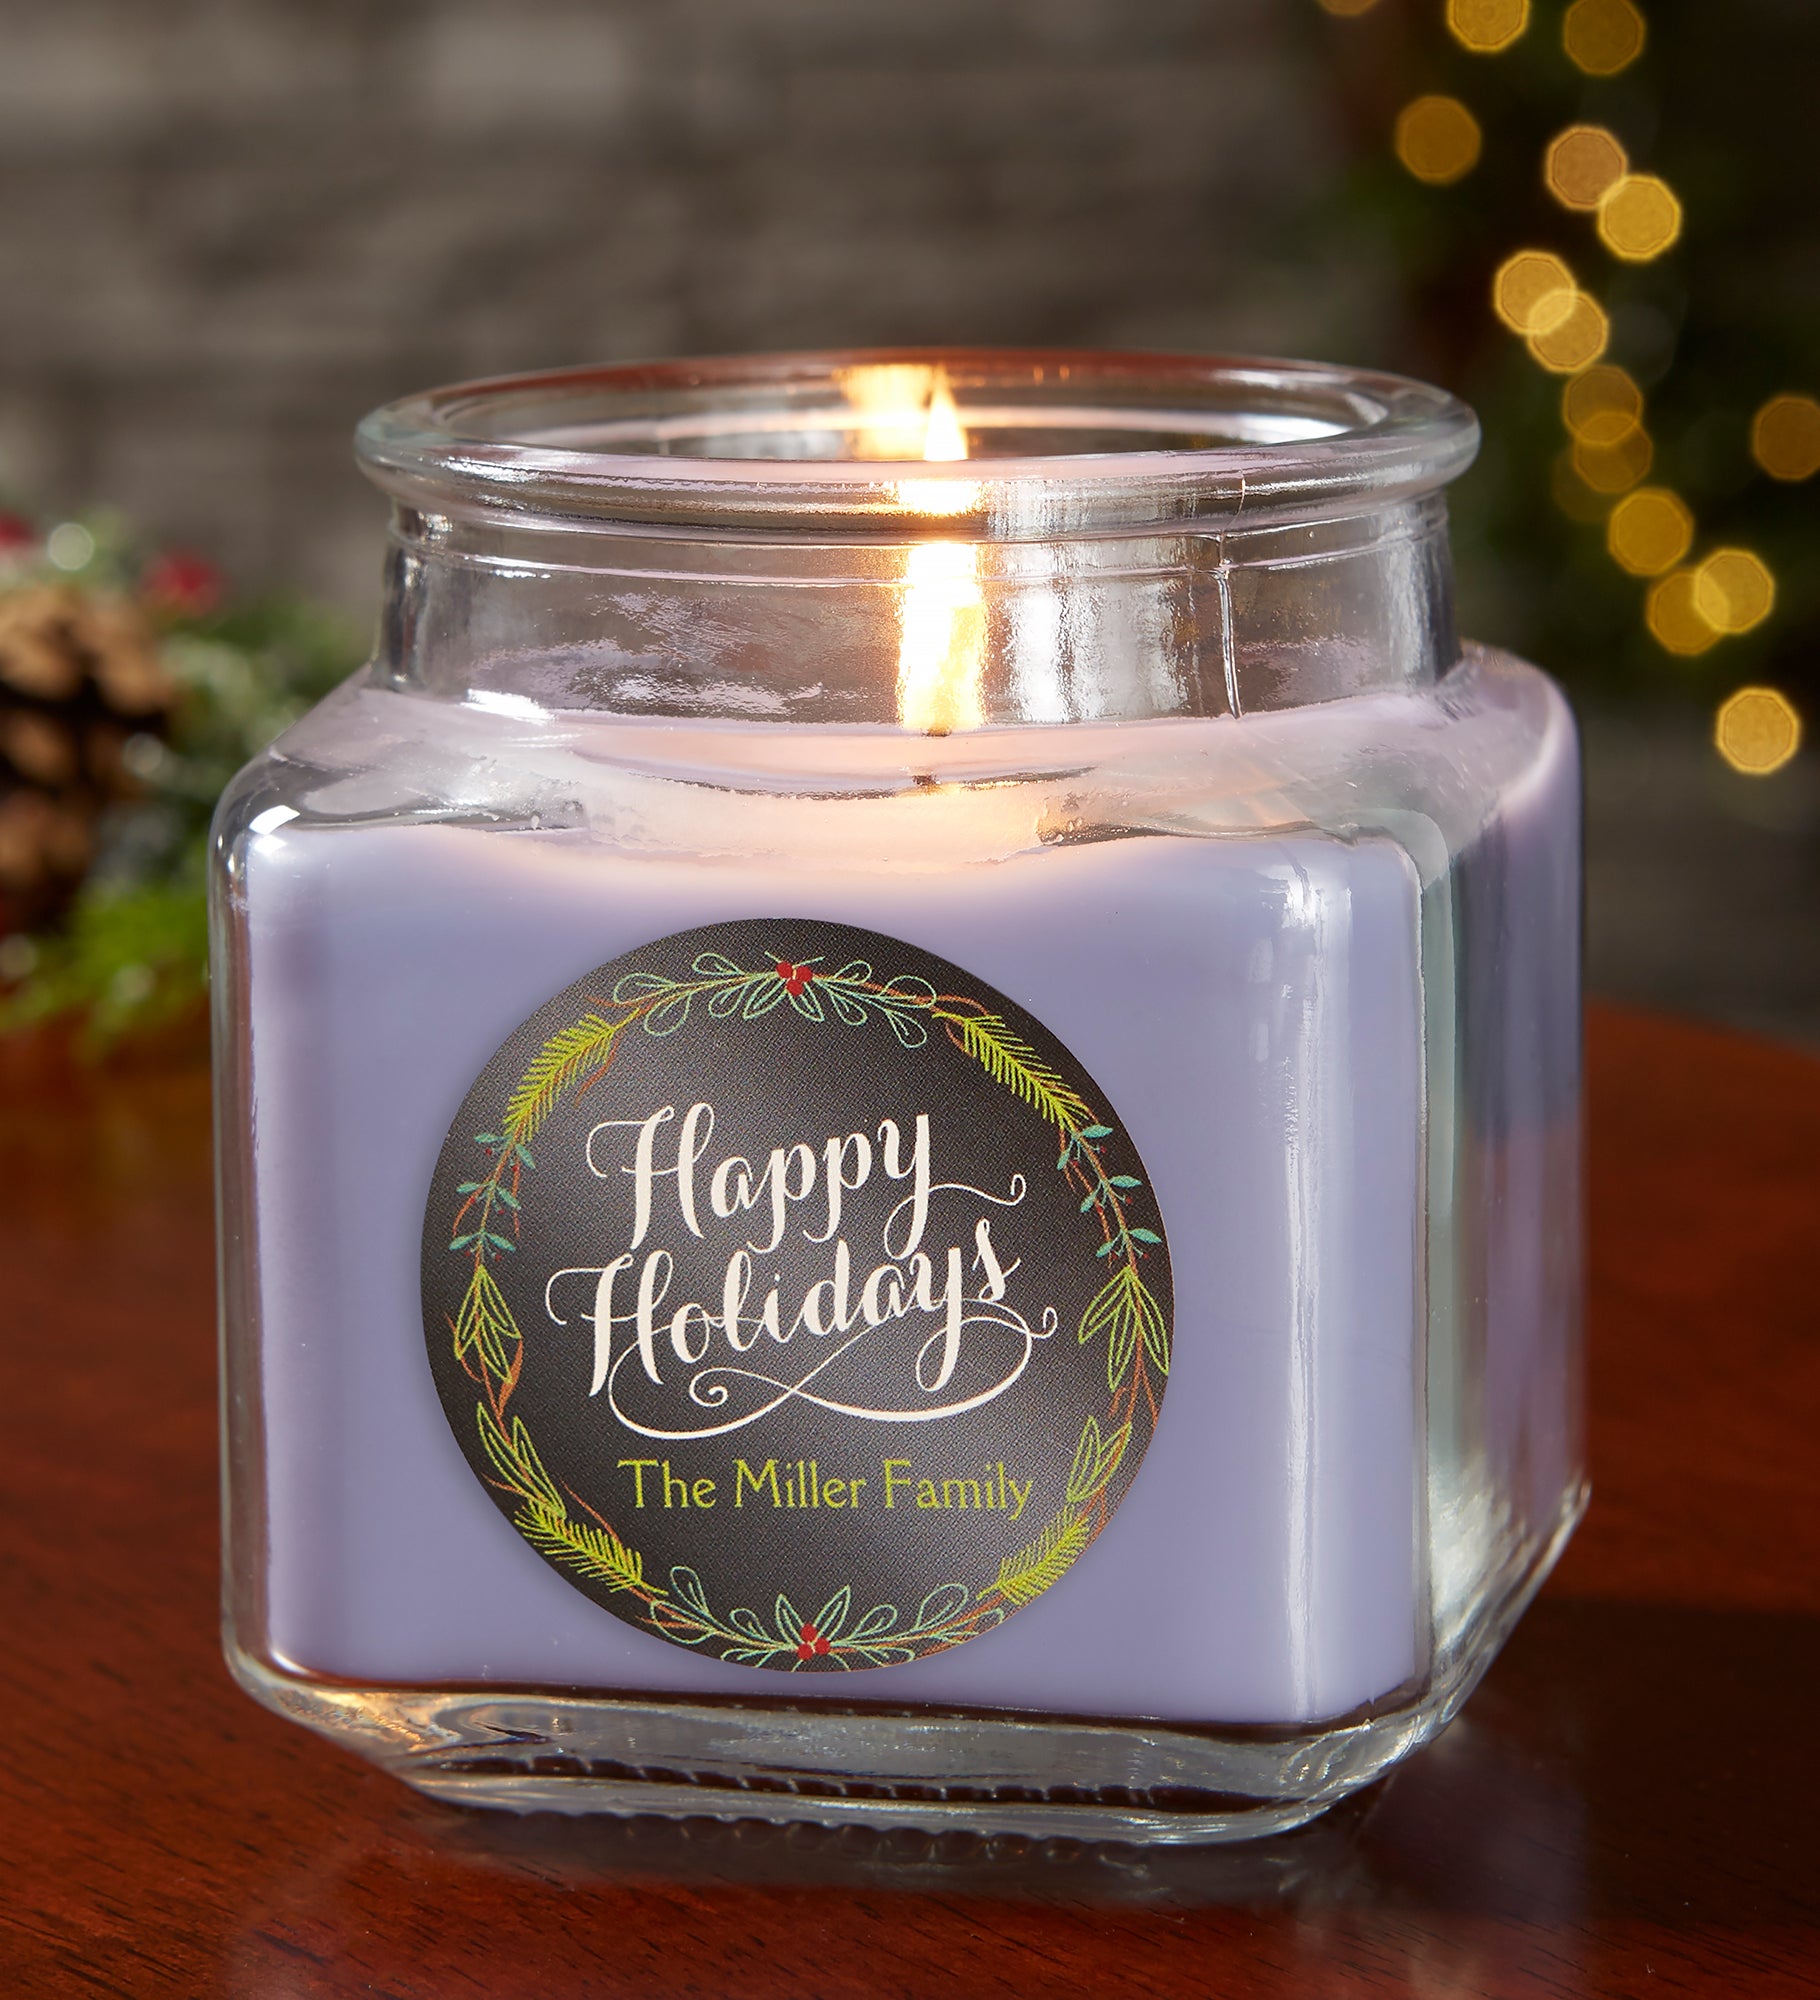 Happy Holidays Personalized Scented Candle Jar